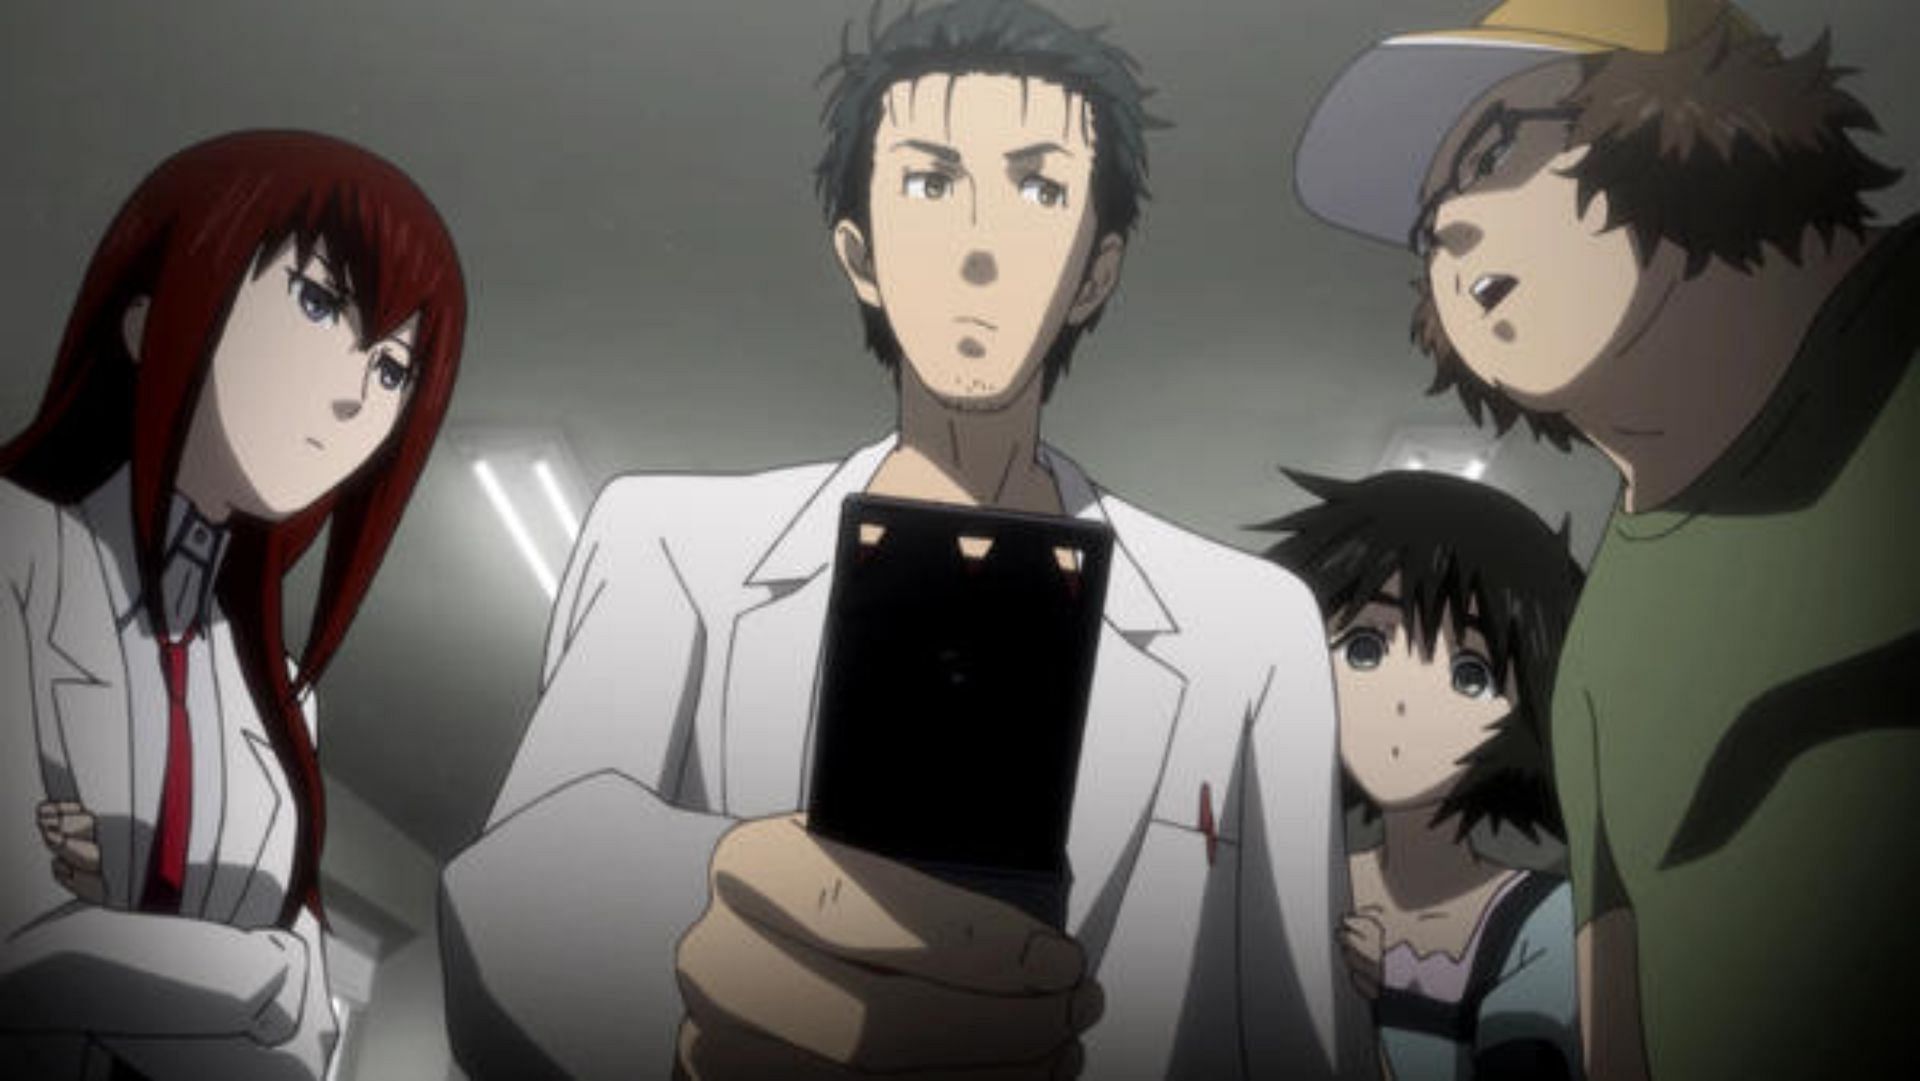 All central characters of the anime Steins Gate (Image via Jukki Hanada/White Fox)